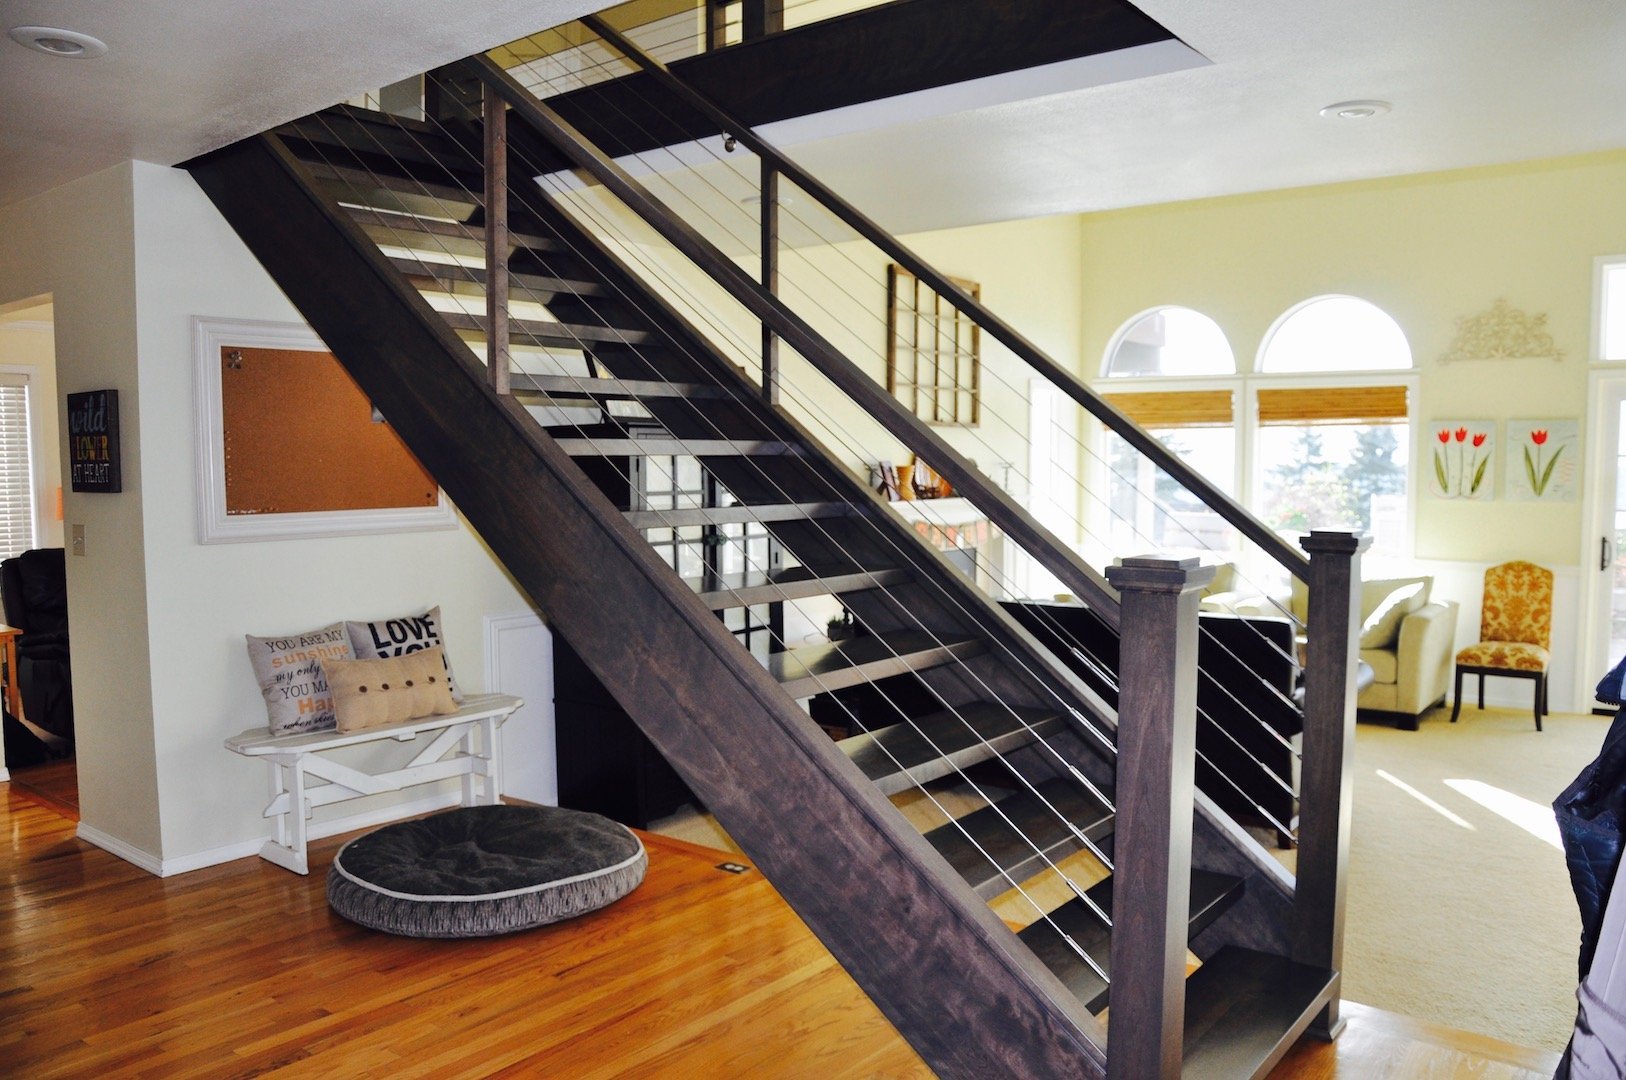 Quality Stairs & Wood Working